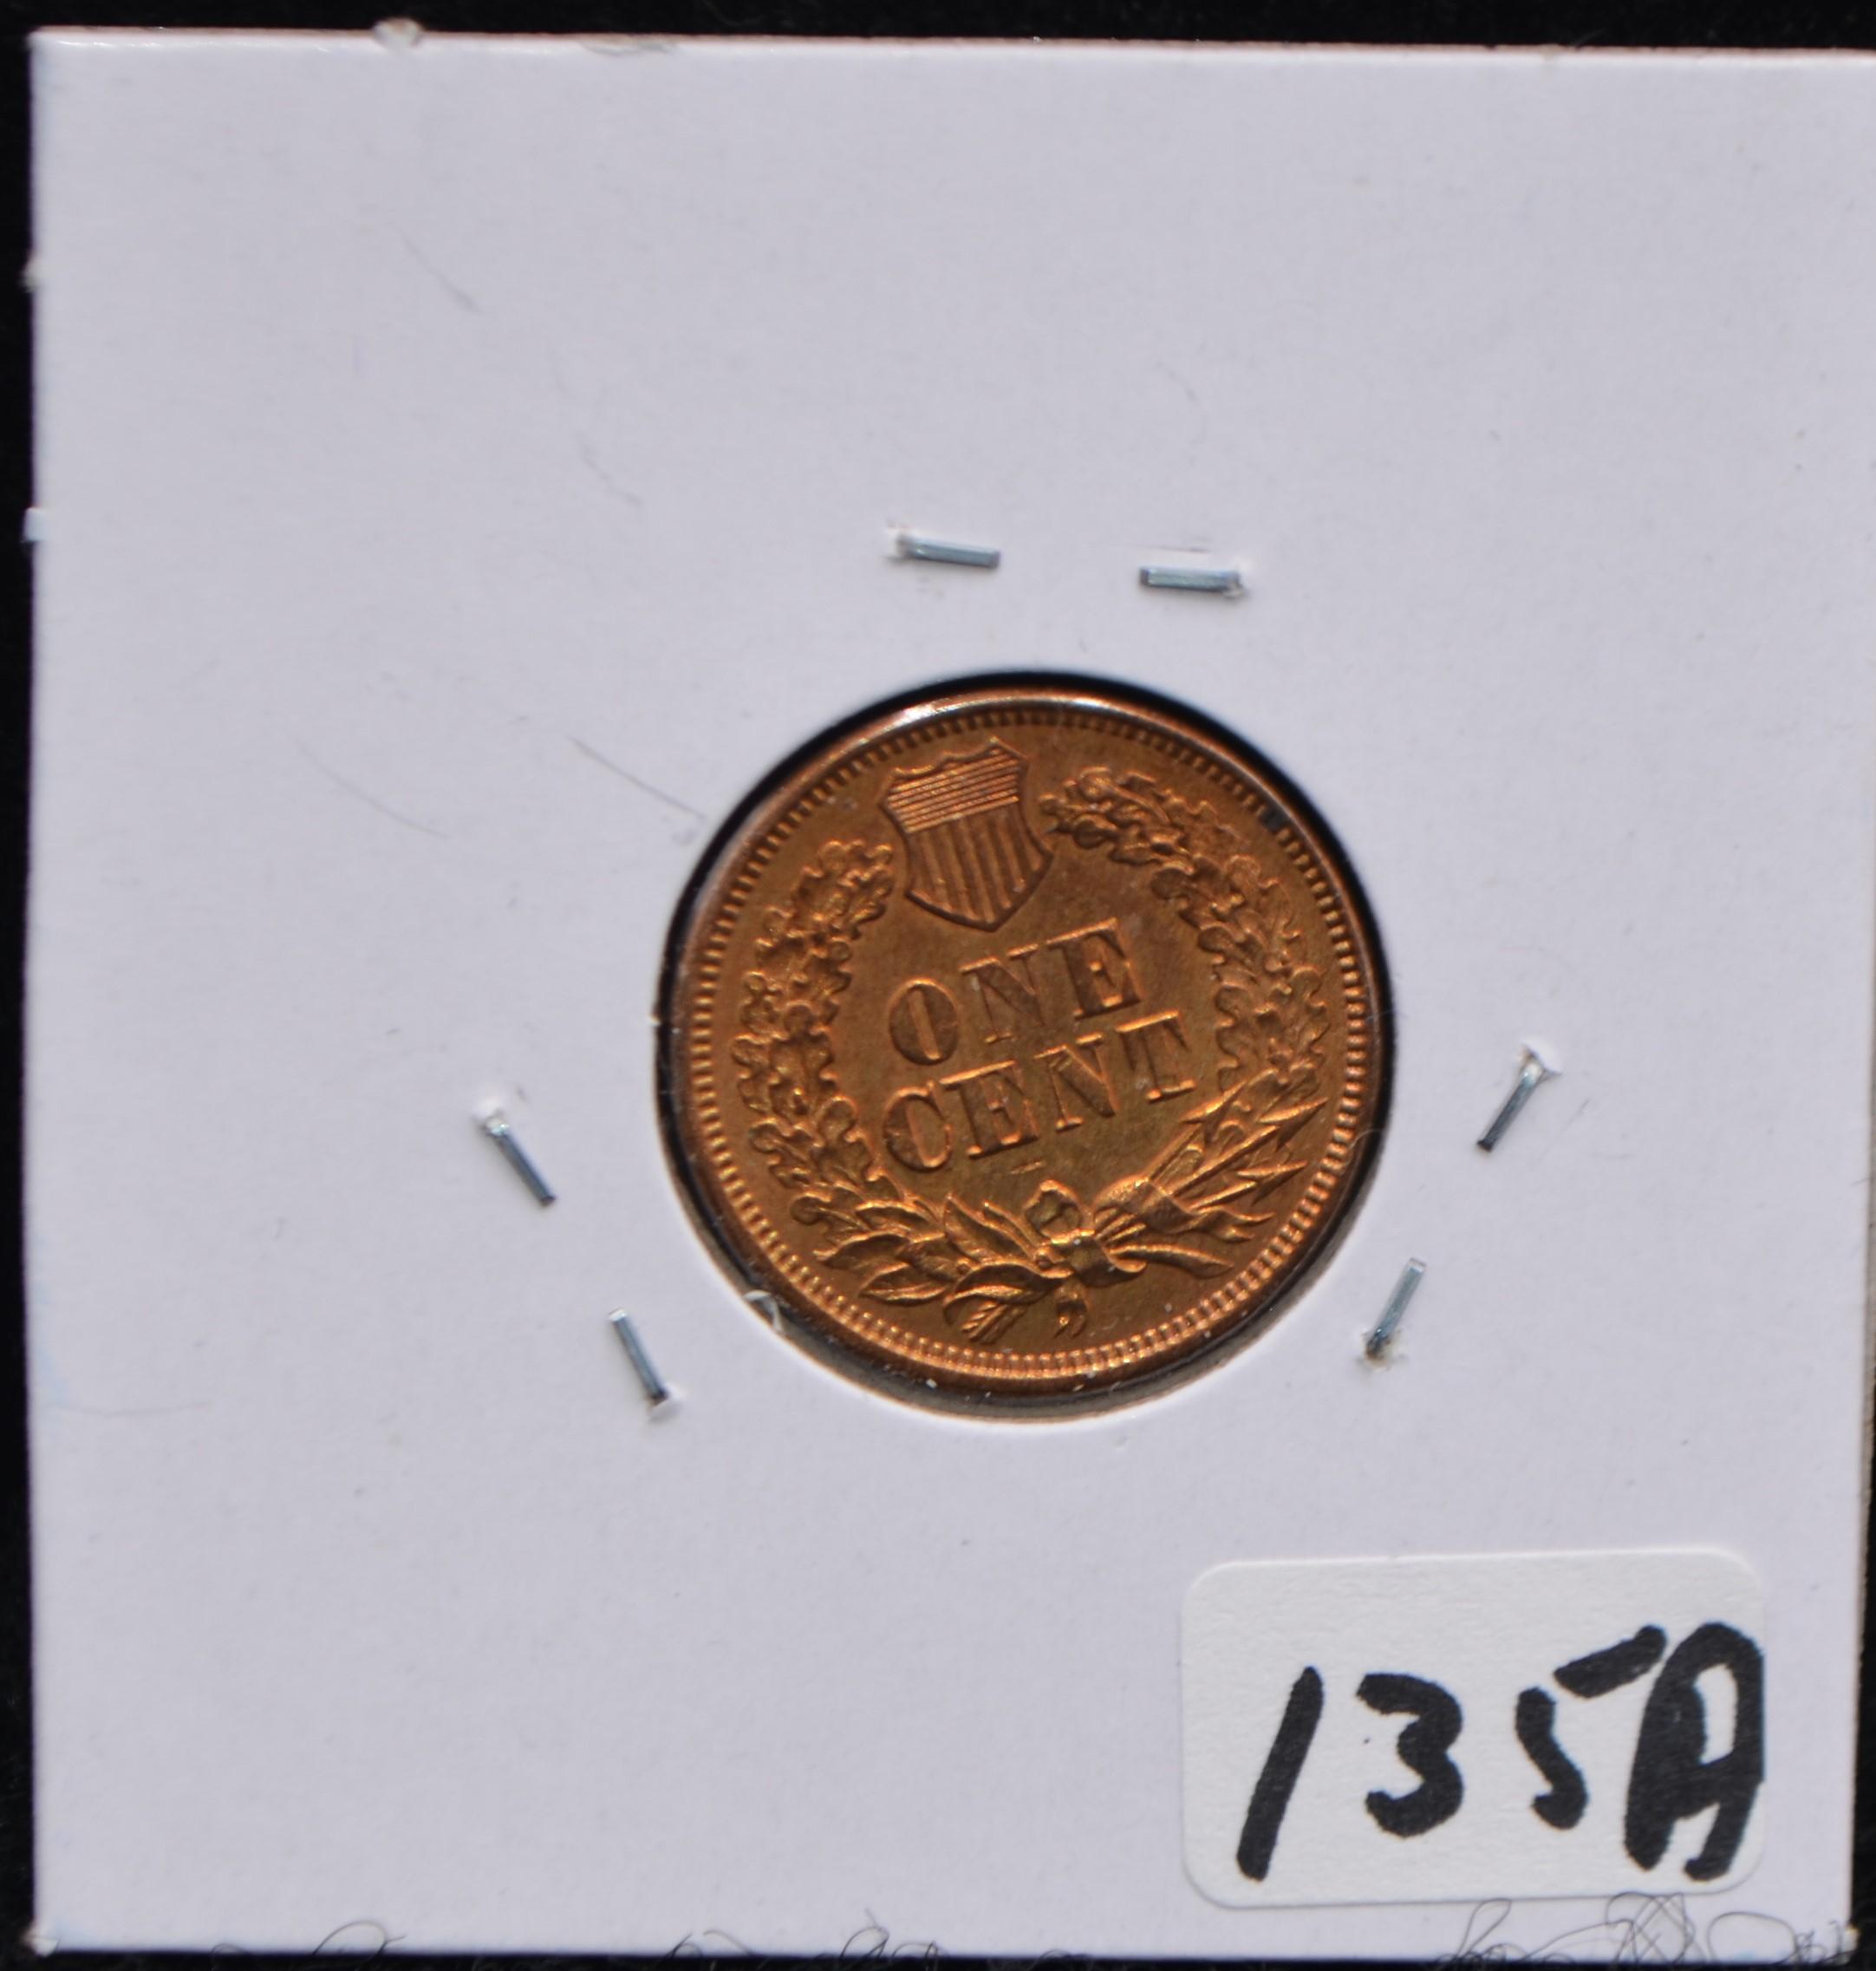 1868 INDIAN HEAD PENNY